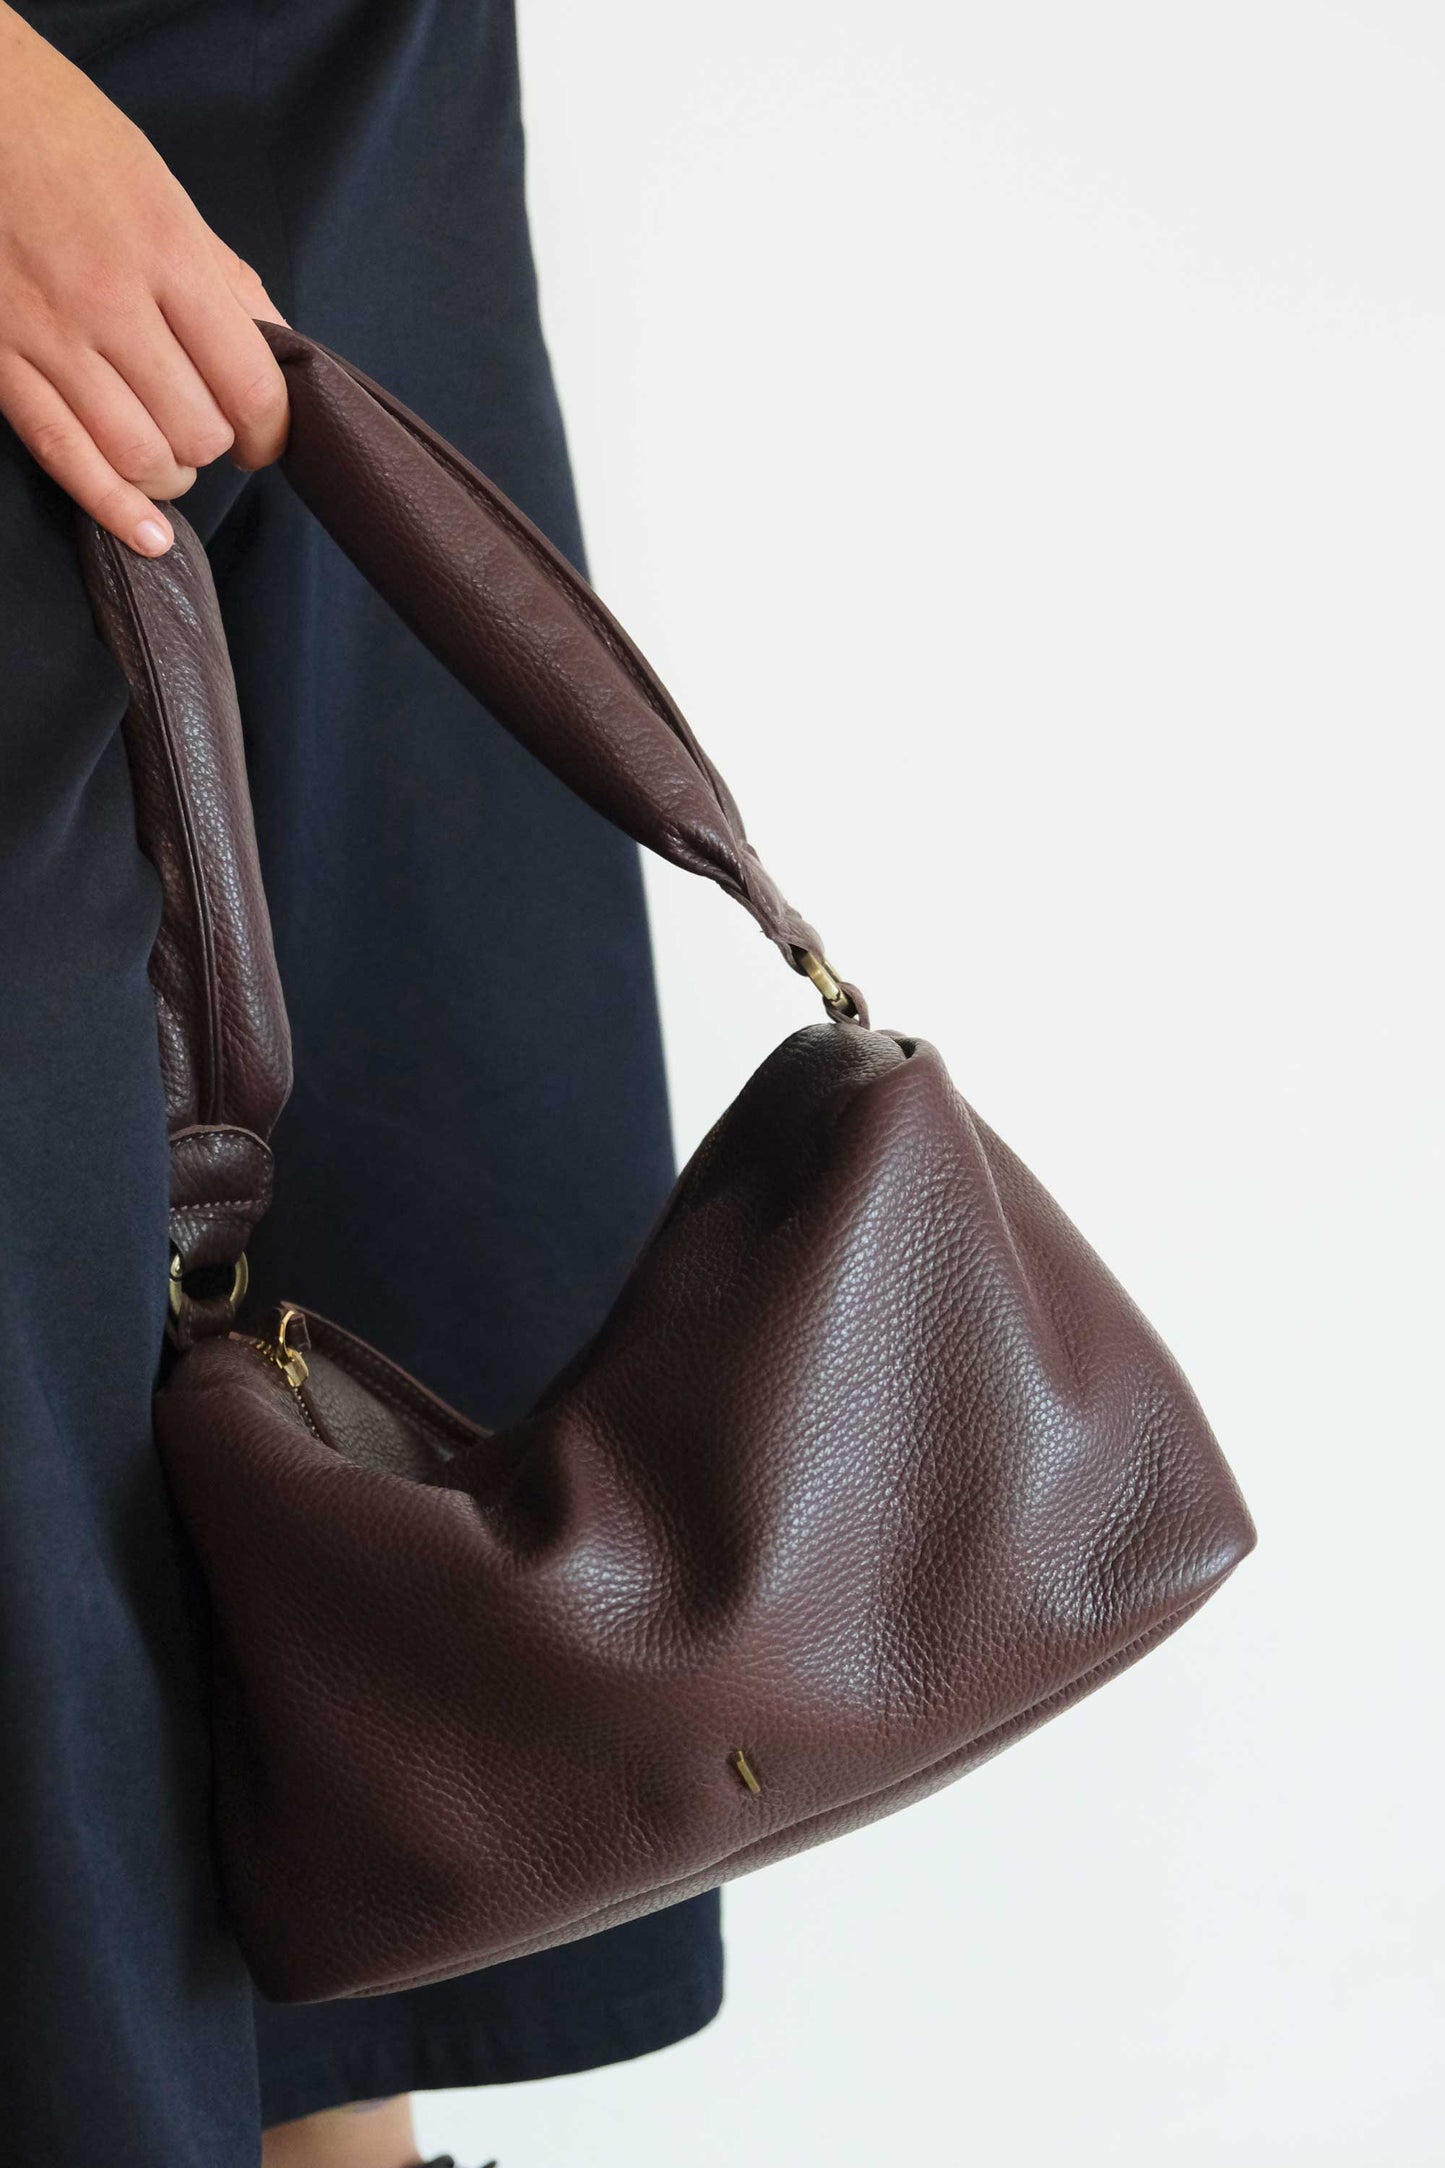 Bobo Torchon top handle bag in leather with natural grain